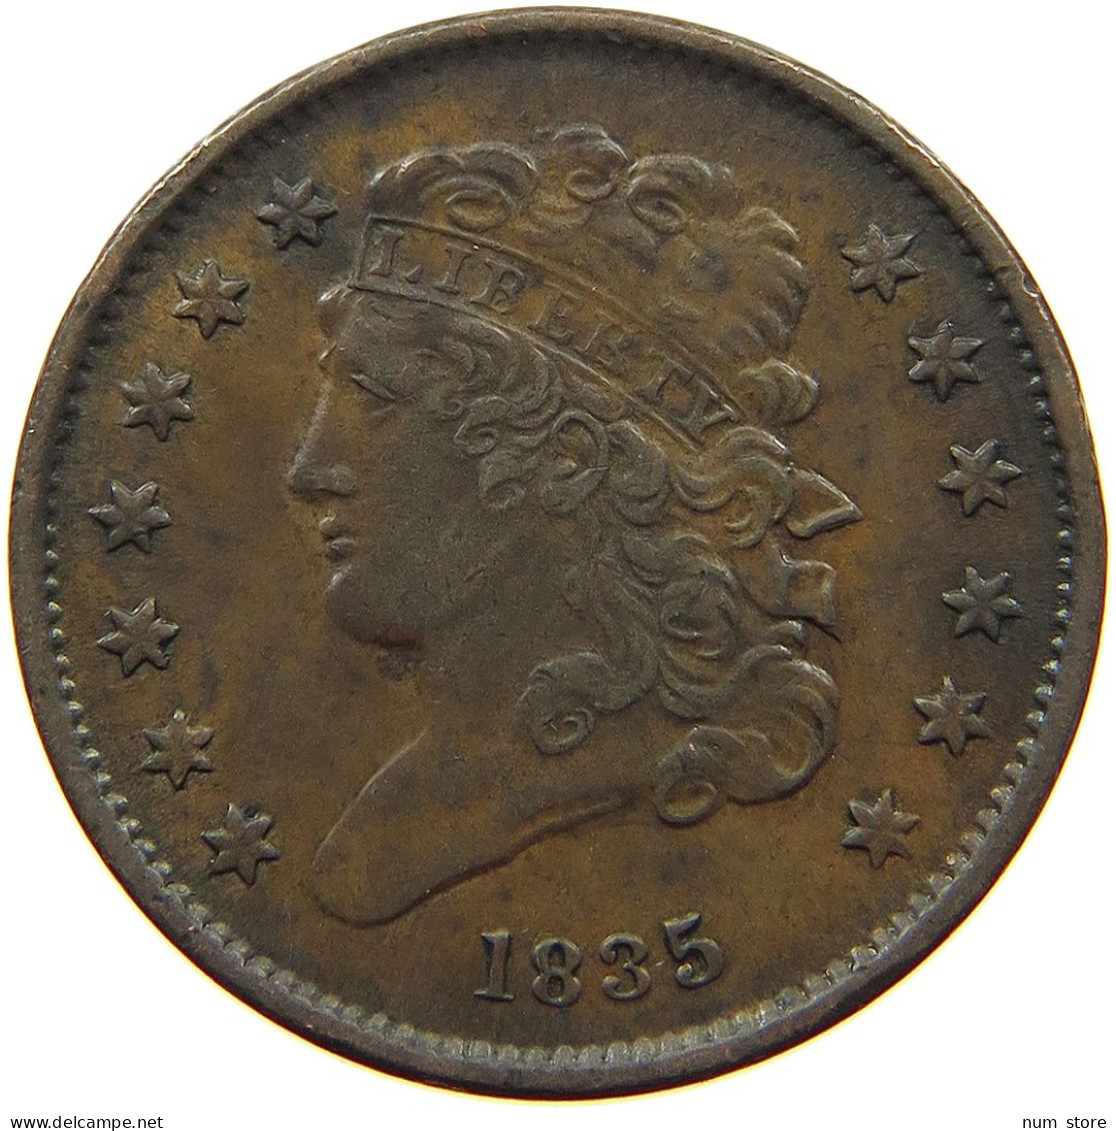 UNITED STATES OF AMERICA HALF CENT 1835 CLASSIC HEAD #t084 0323 - Cents Medianos